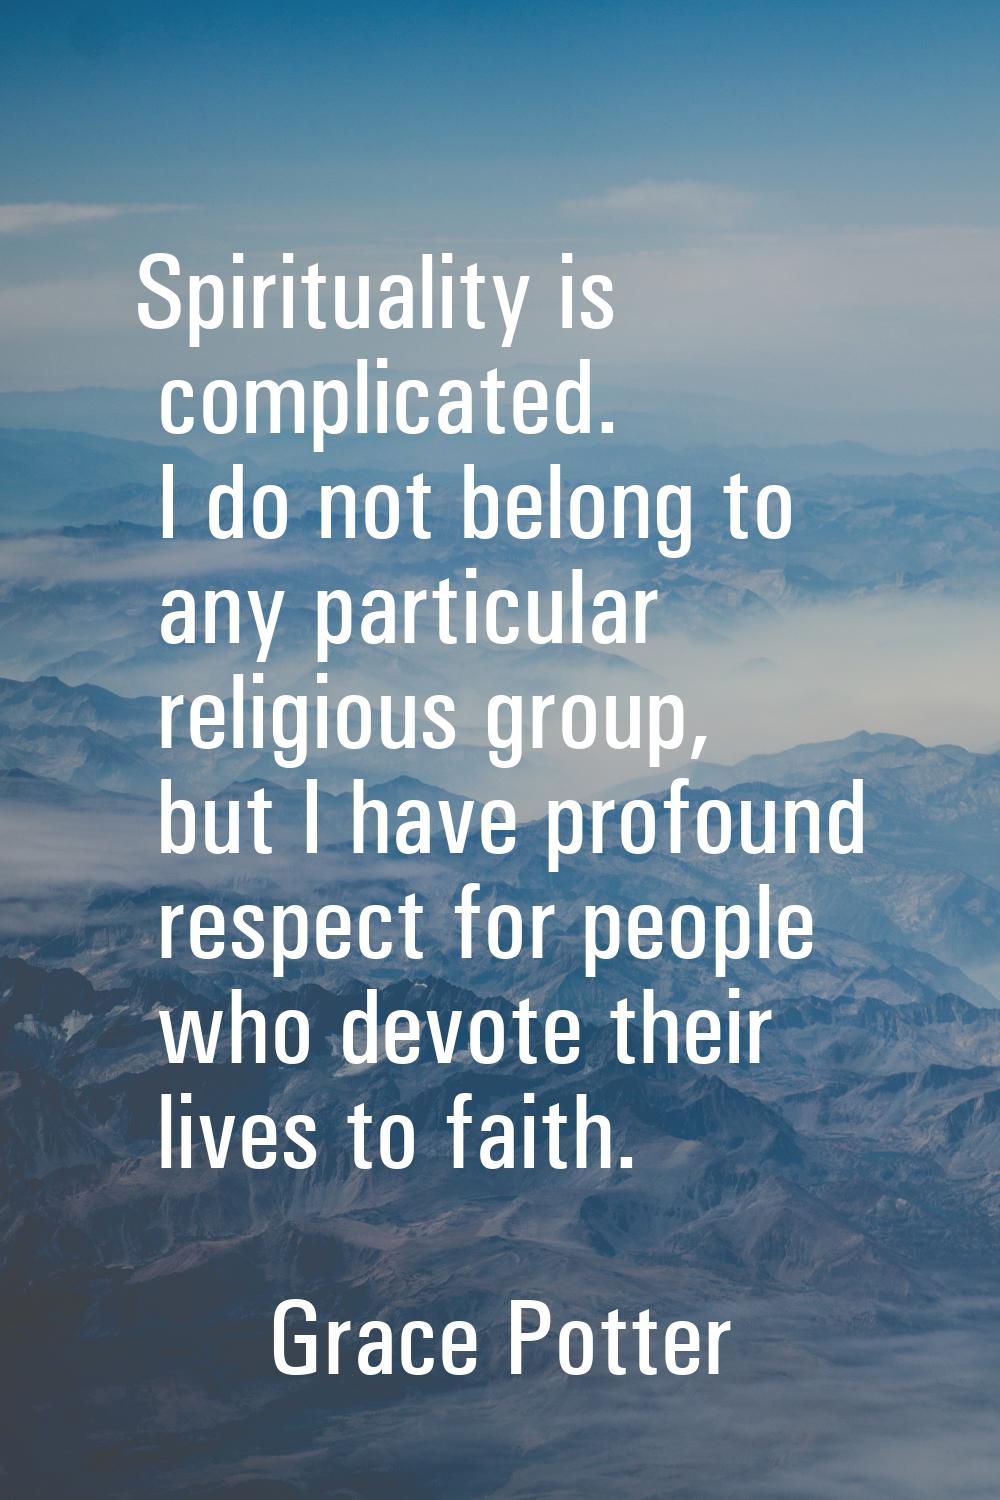 Spirituality is complicated. I do not belong to any particular religious group, but I have profound